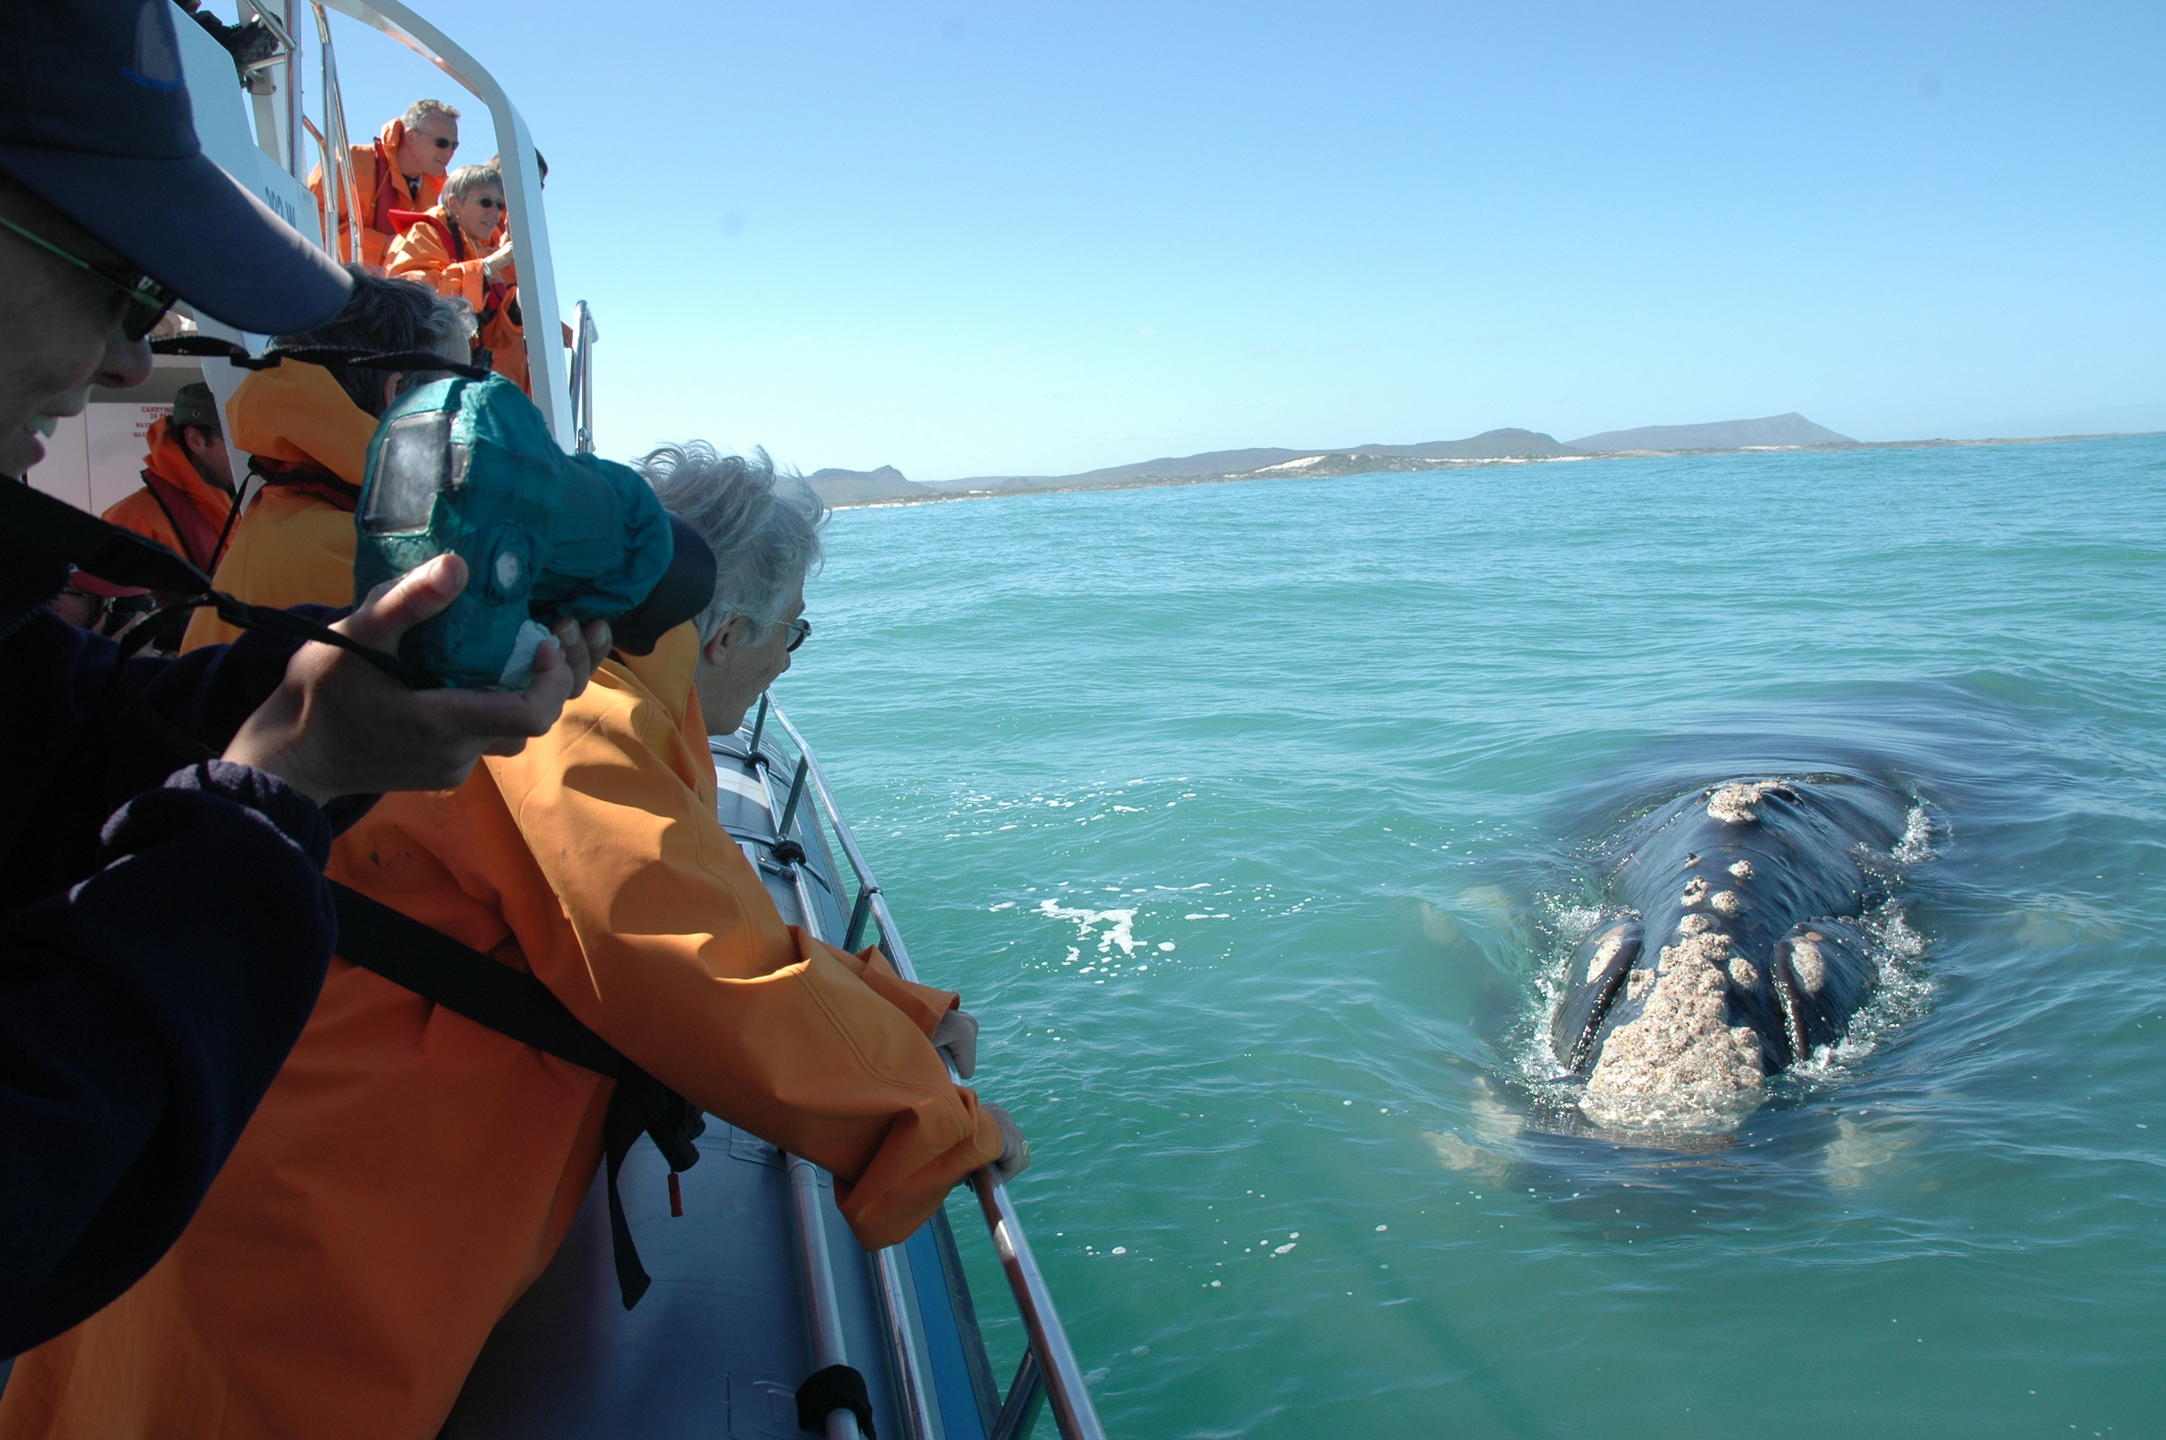 A person reaching out to a whale passing close to a tour boat